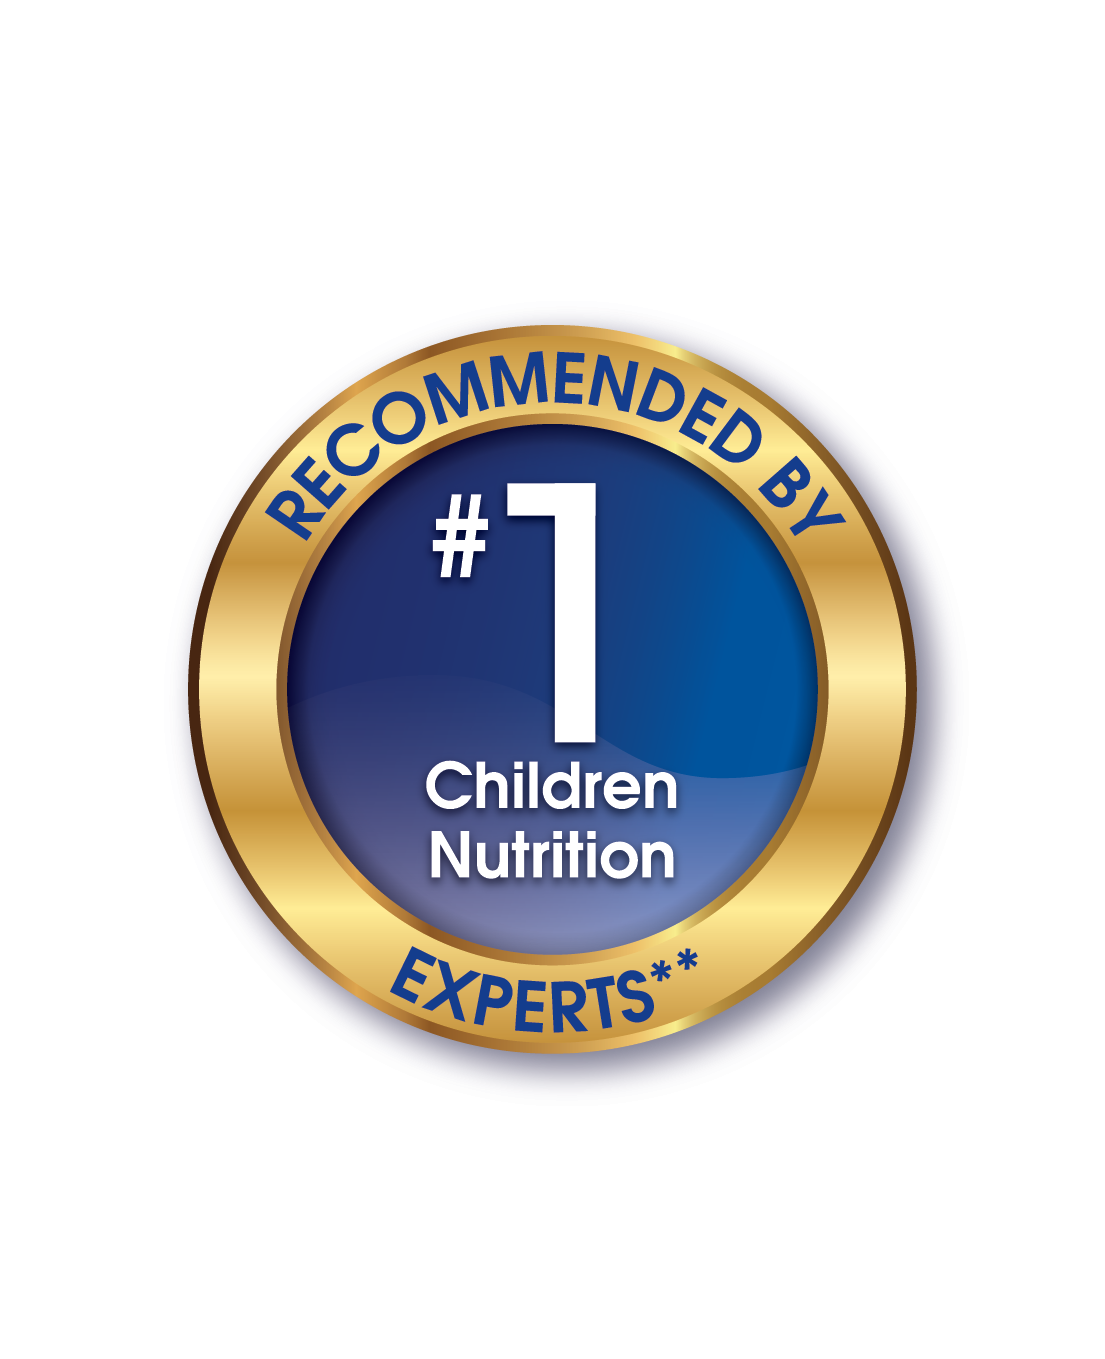 Recommended by #1 Children Nutrition Experts